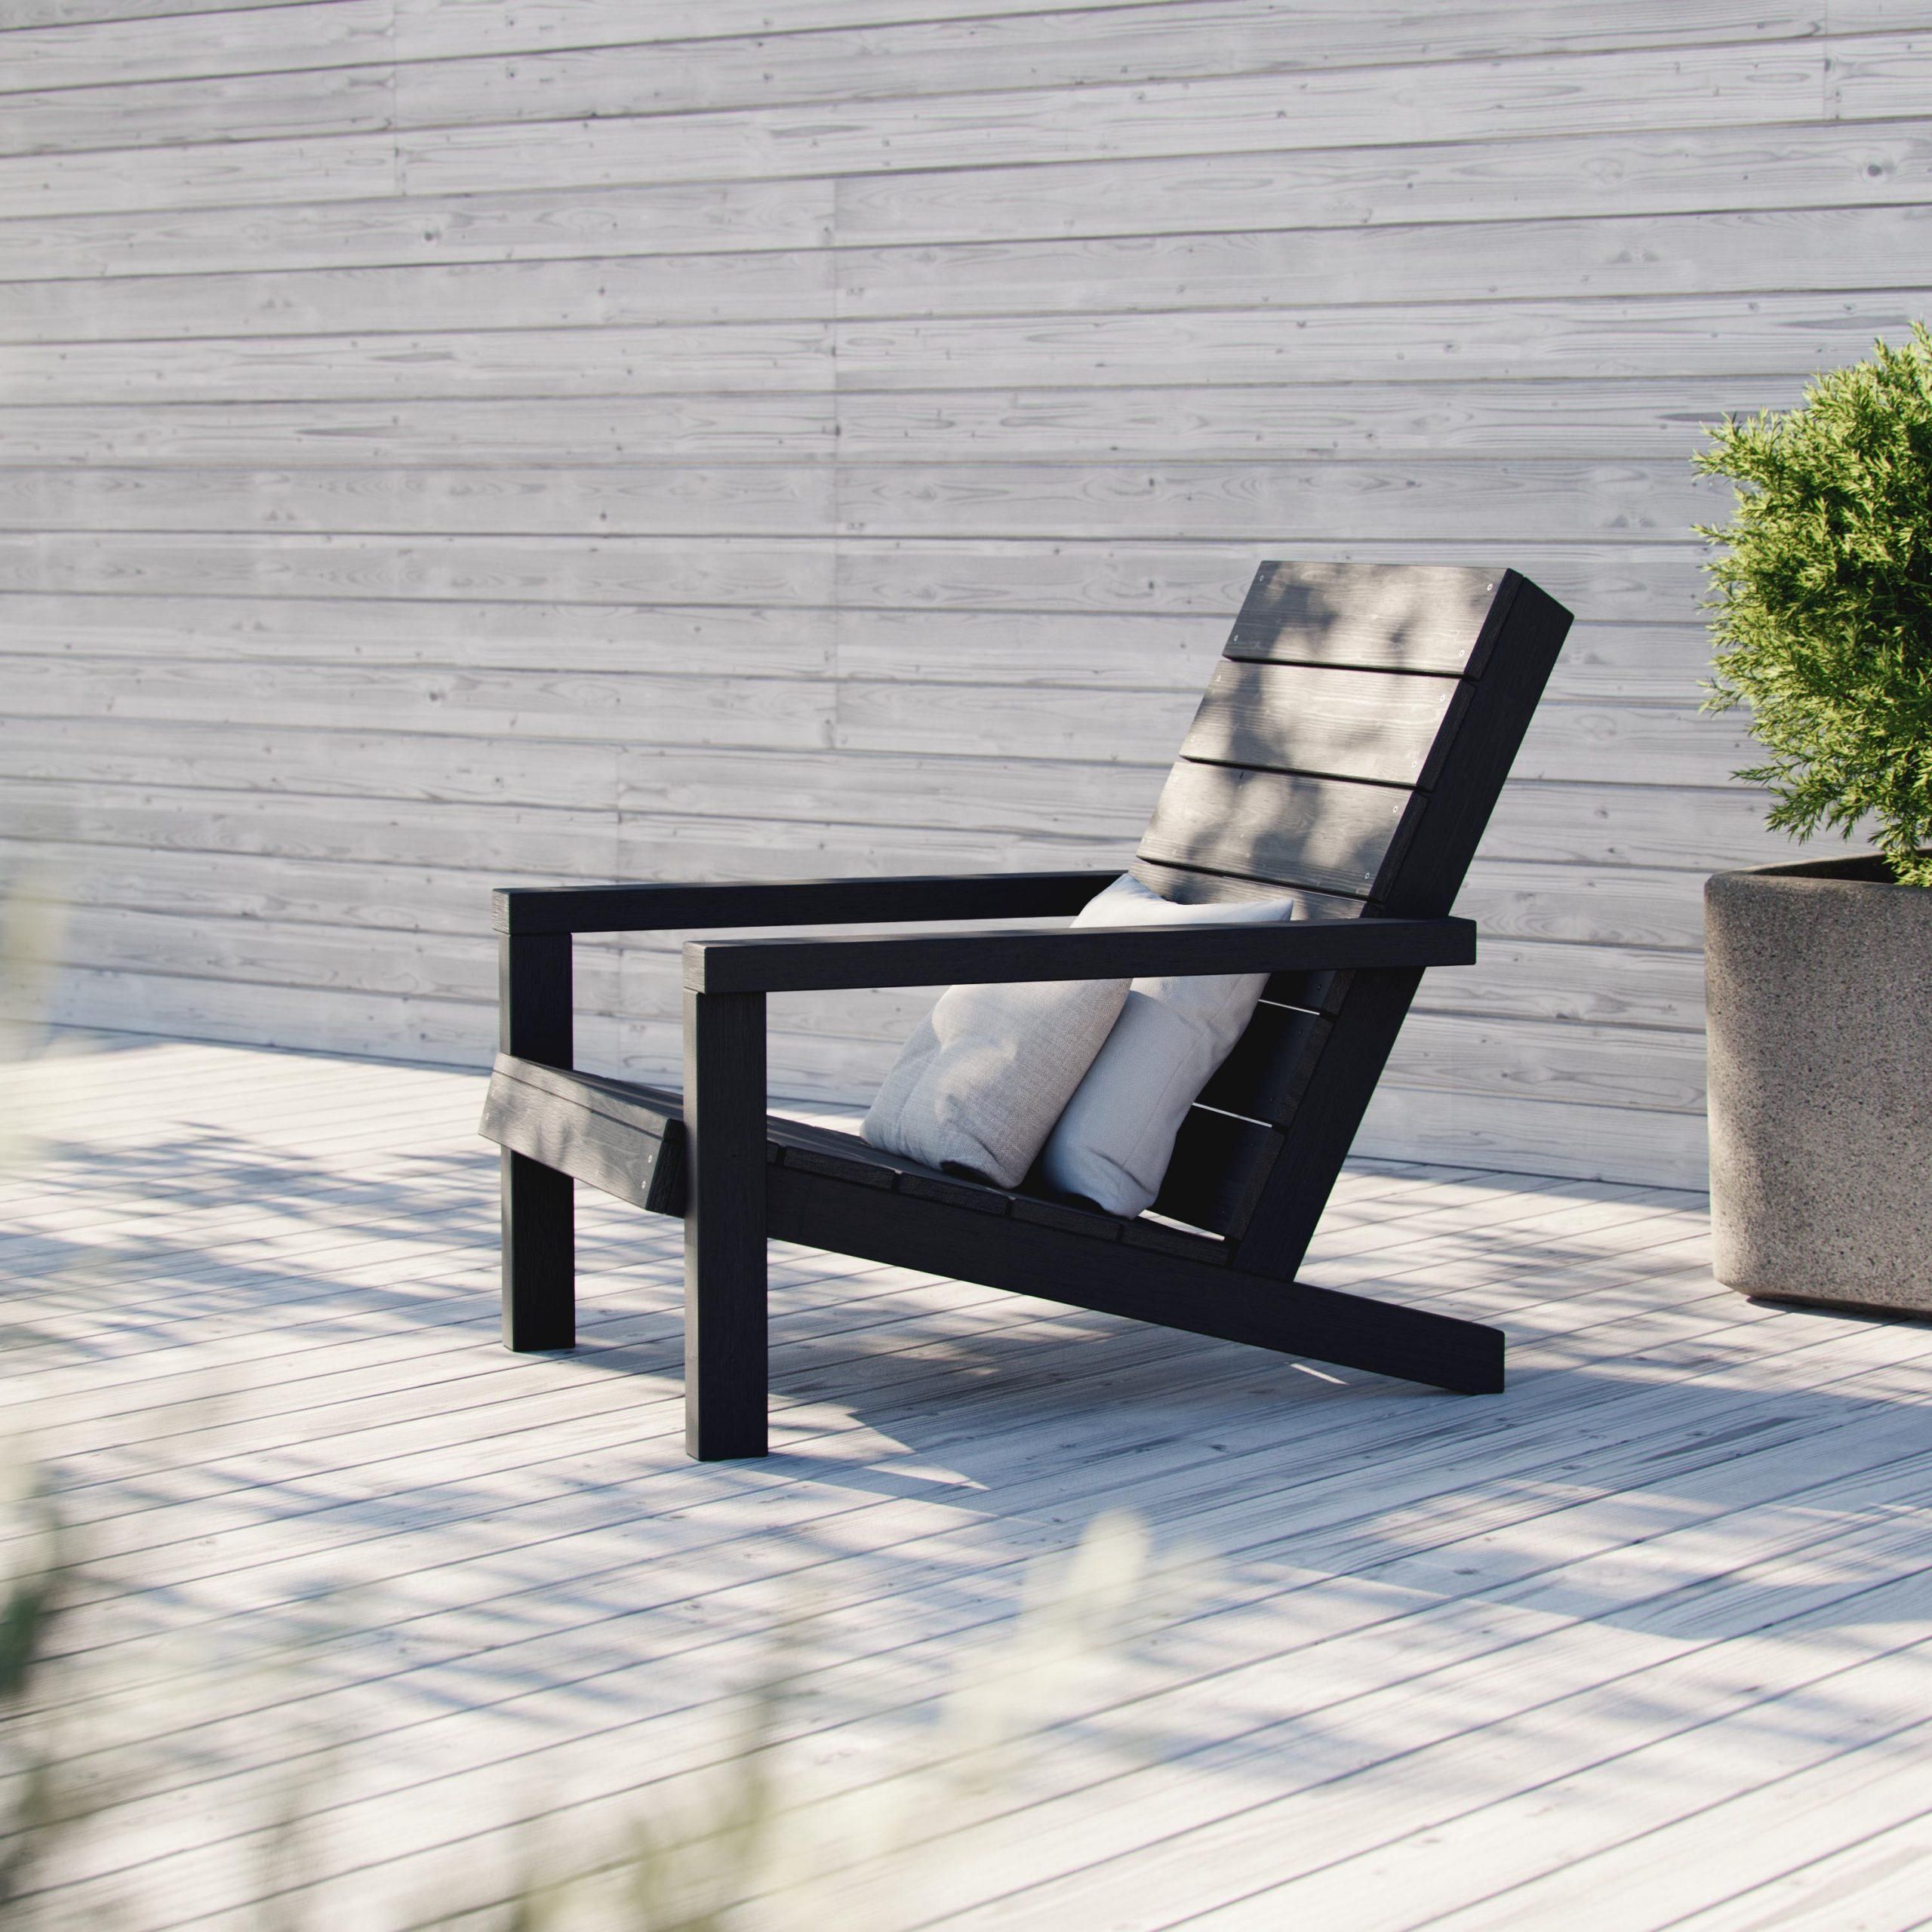 Relax in Style: Adirondack Chairs for Outdoor Comfort